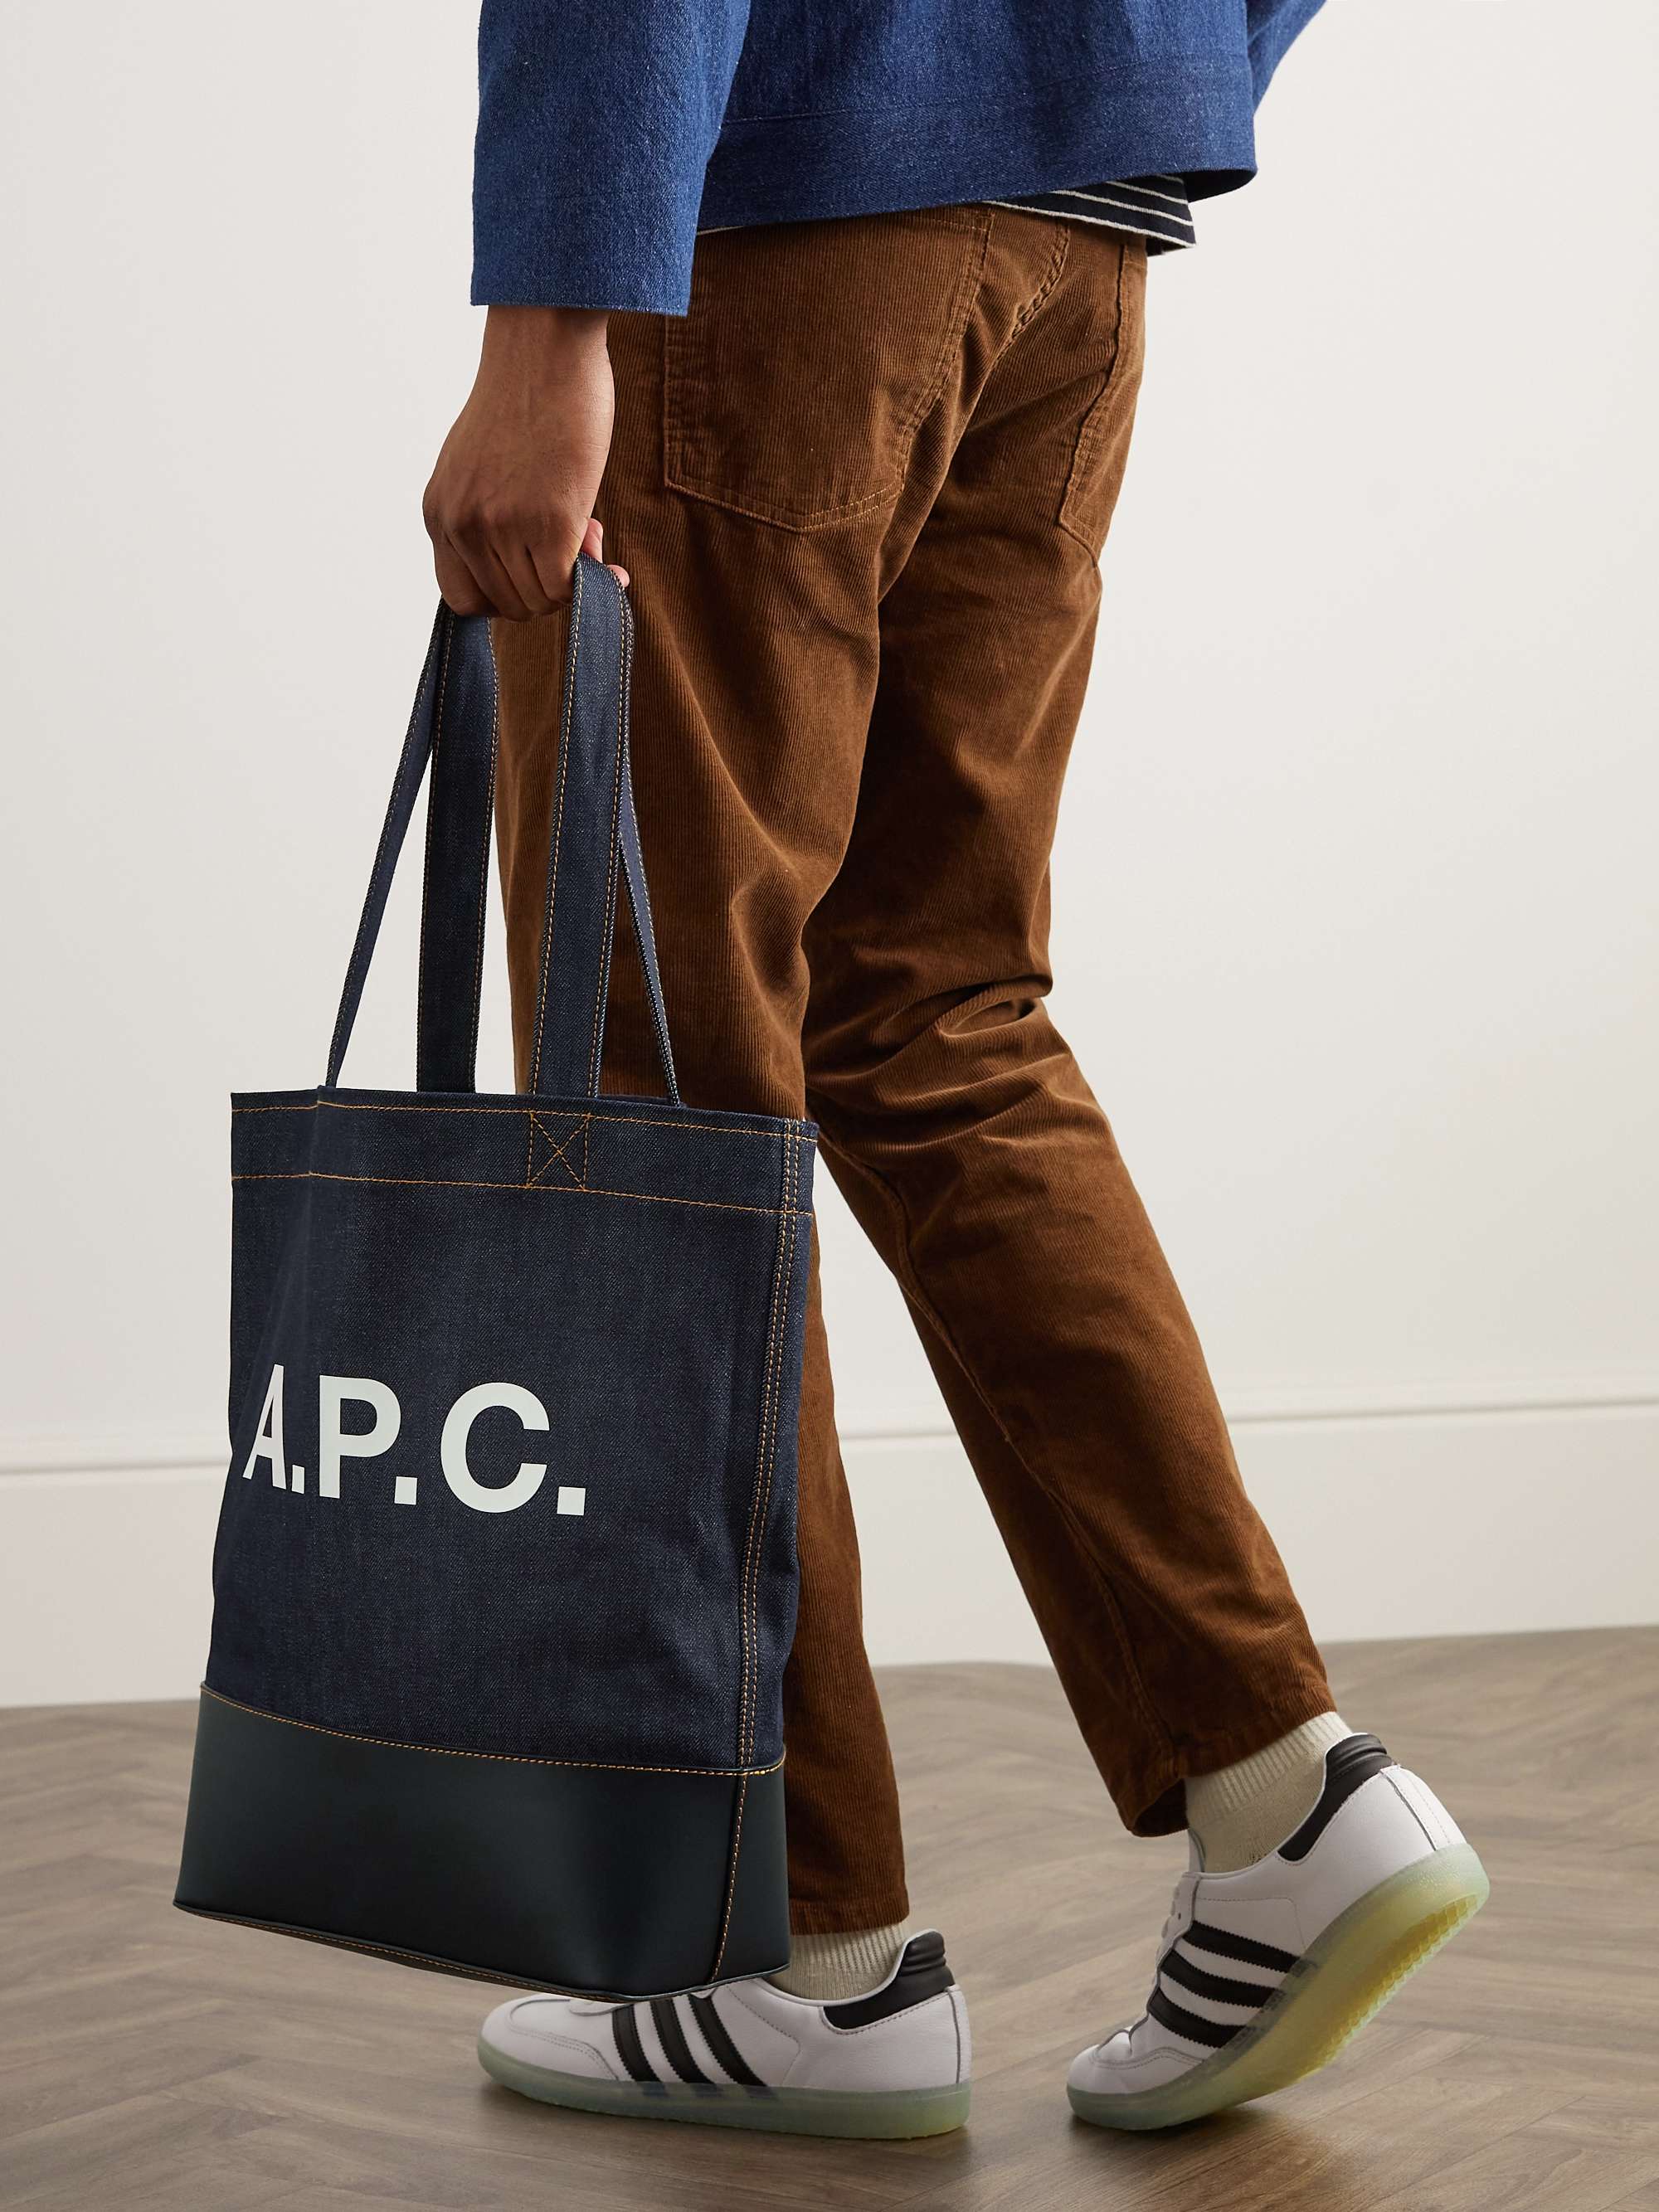 A.P.C. Axel Logo-Print Denim and Leather Tote Bag